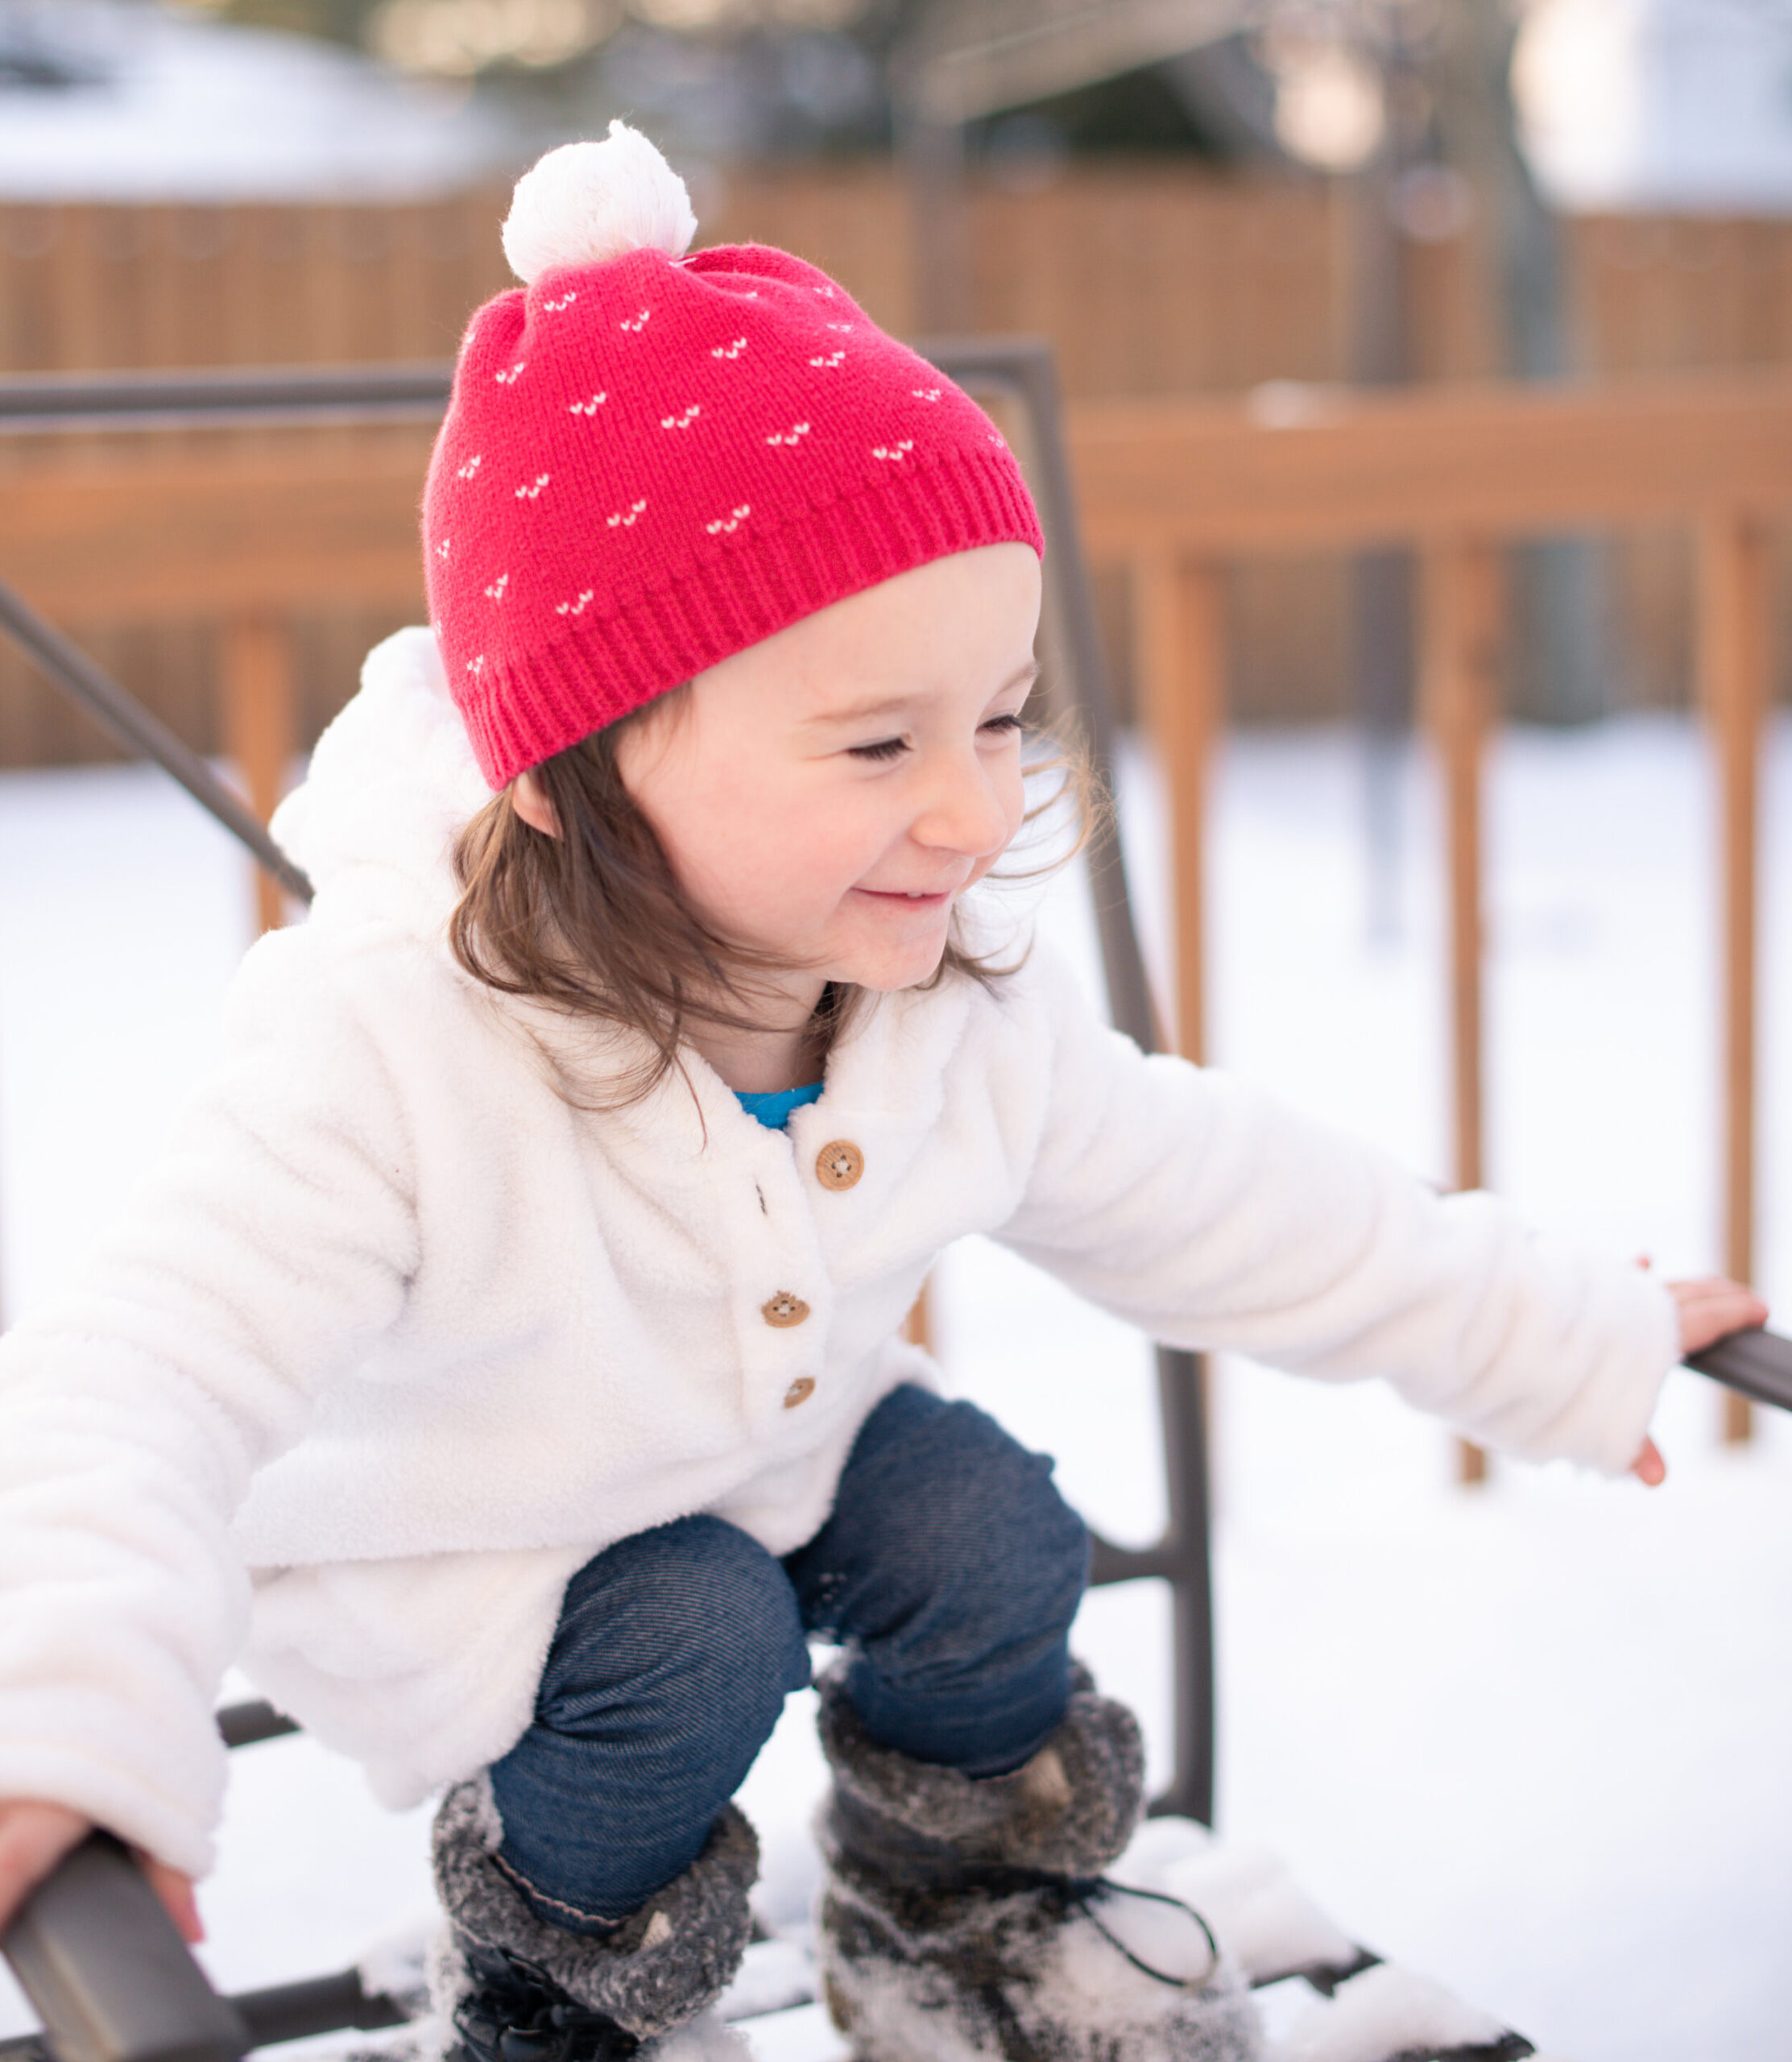 little girl with red and white winter hat, white button up sweater, blue jeans and black fuzzy boots standing on a snow-covered chair smiling 